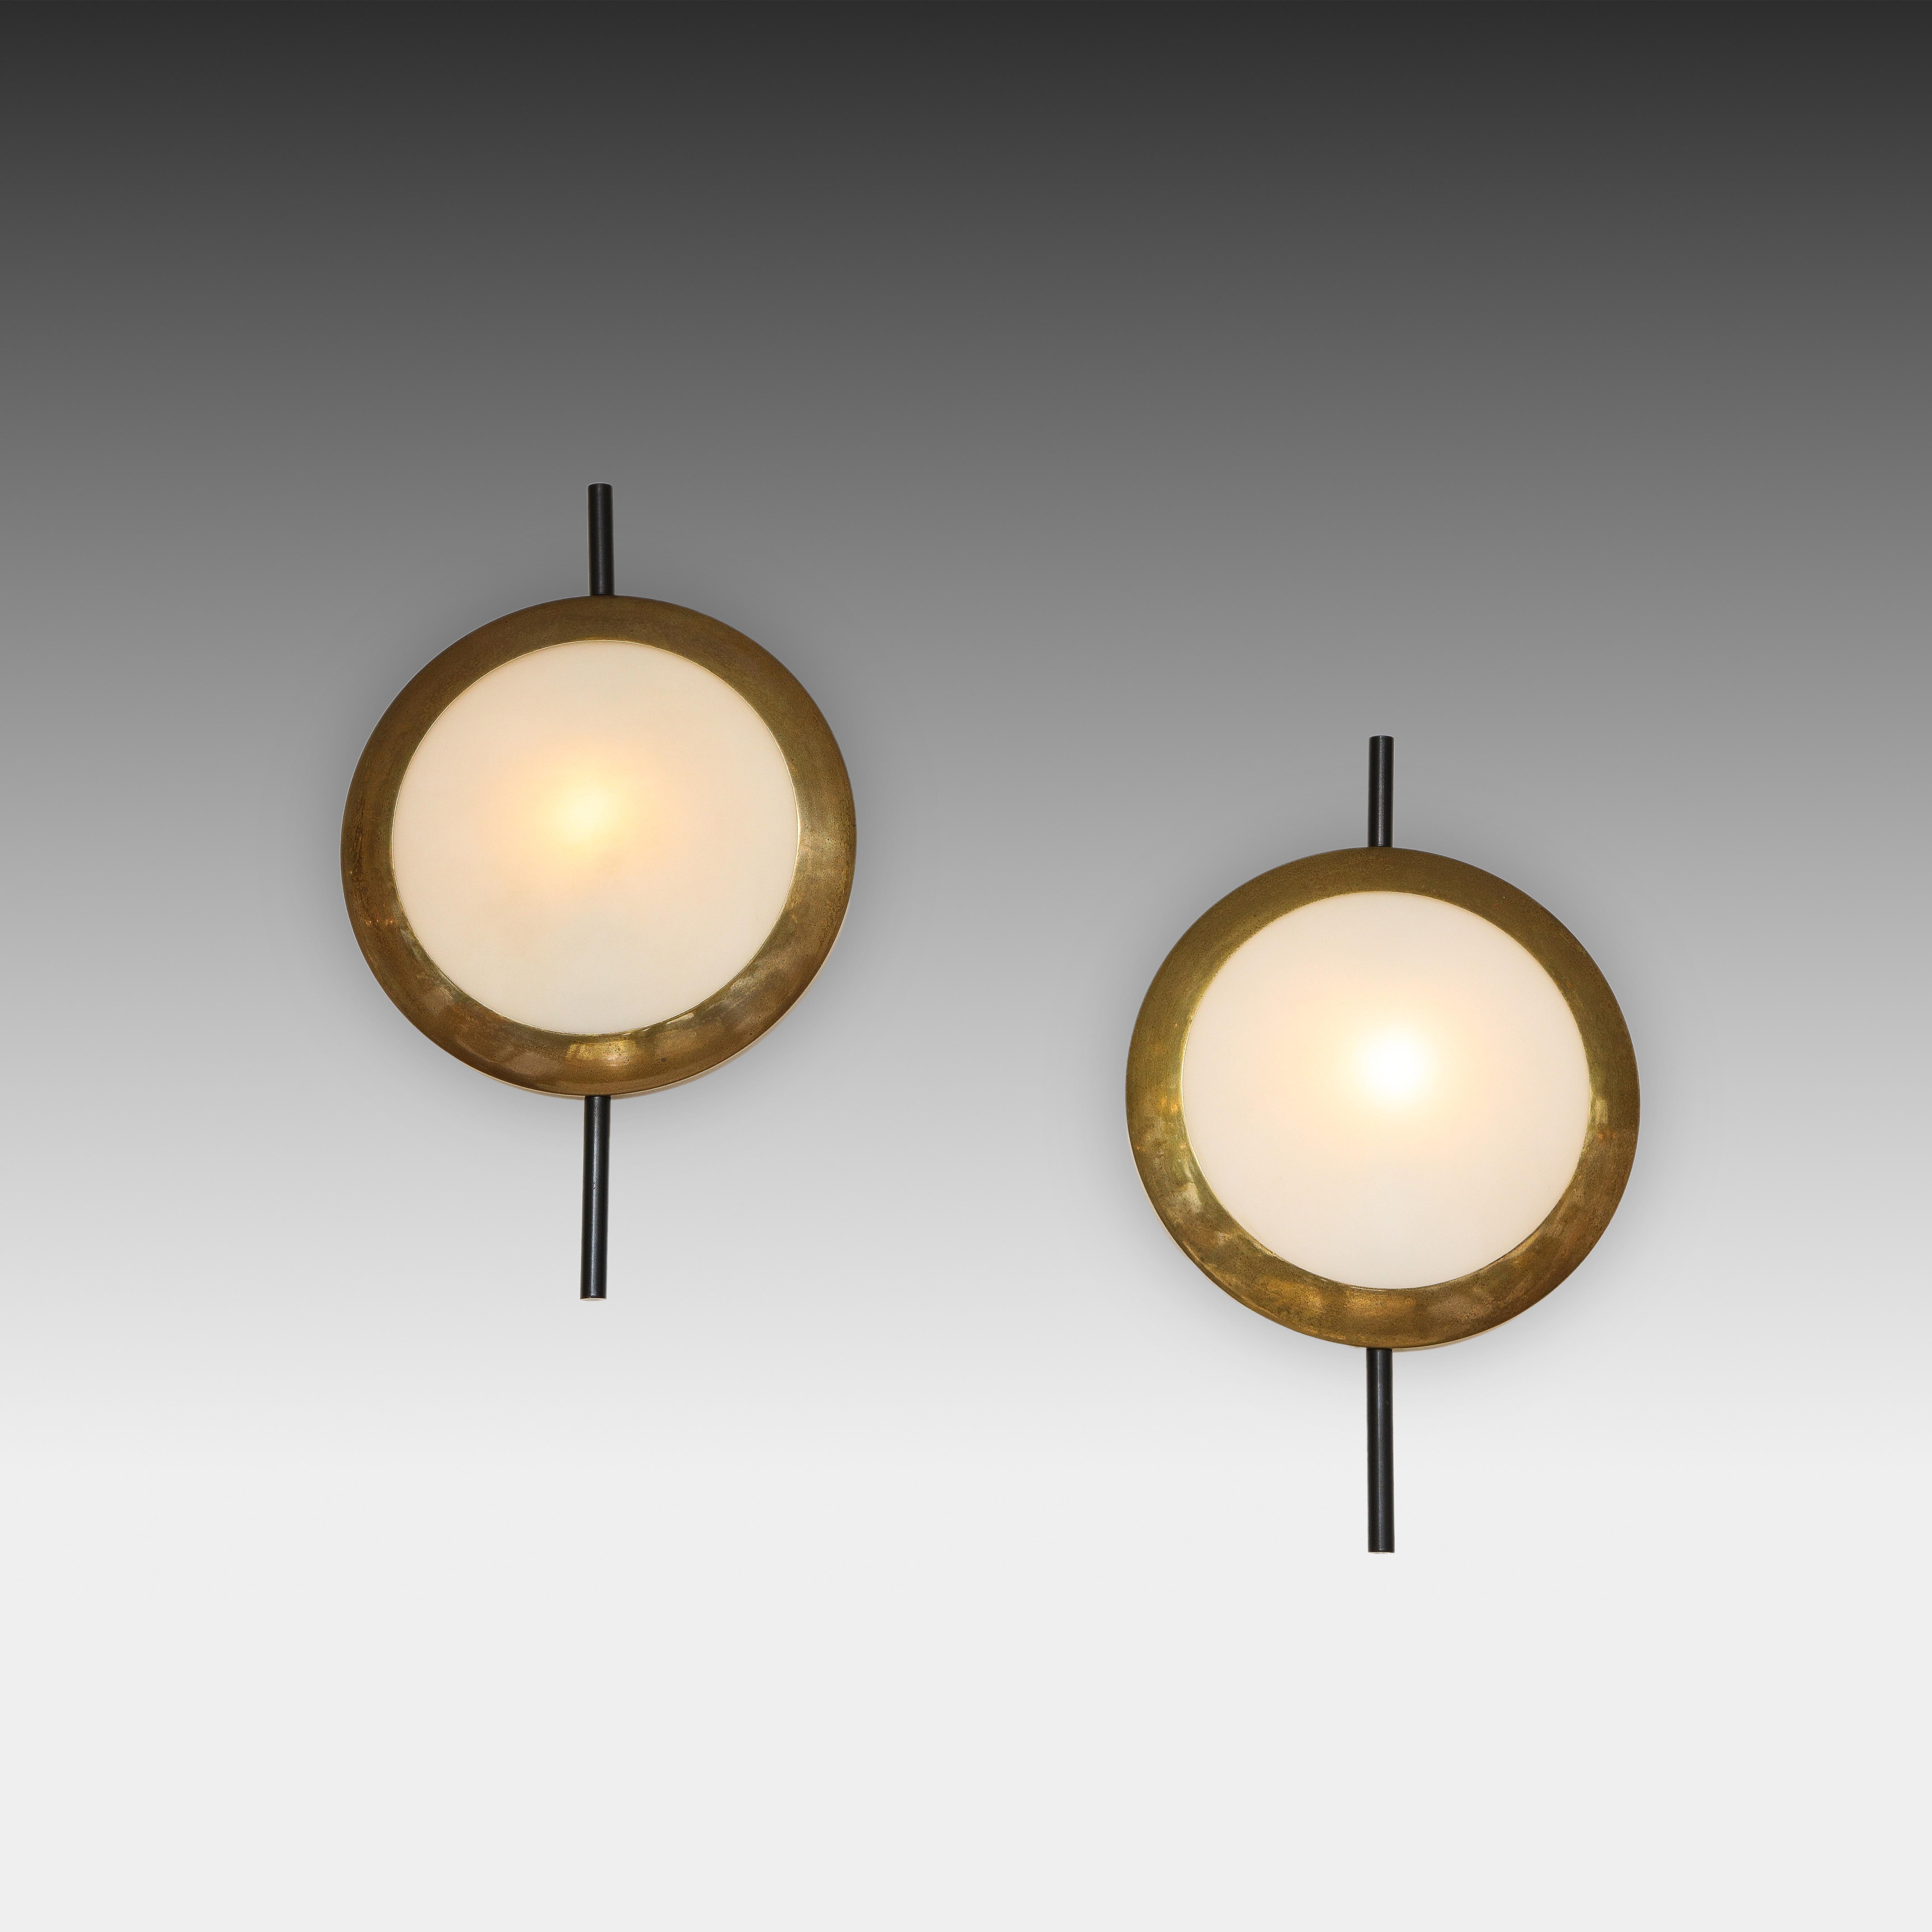 Stilnovo rare pairs of sconces with brass structure and opaline or frosted glass with black enameled metal rods, Italy, 1950s. Manufacturer's label 'STILNOVO' on interior of metal structure.
Price is per pair and set of four sconces available.
 